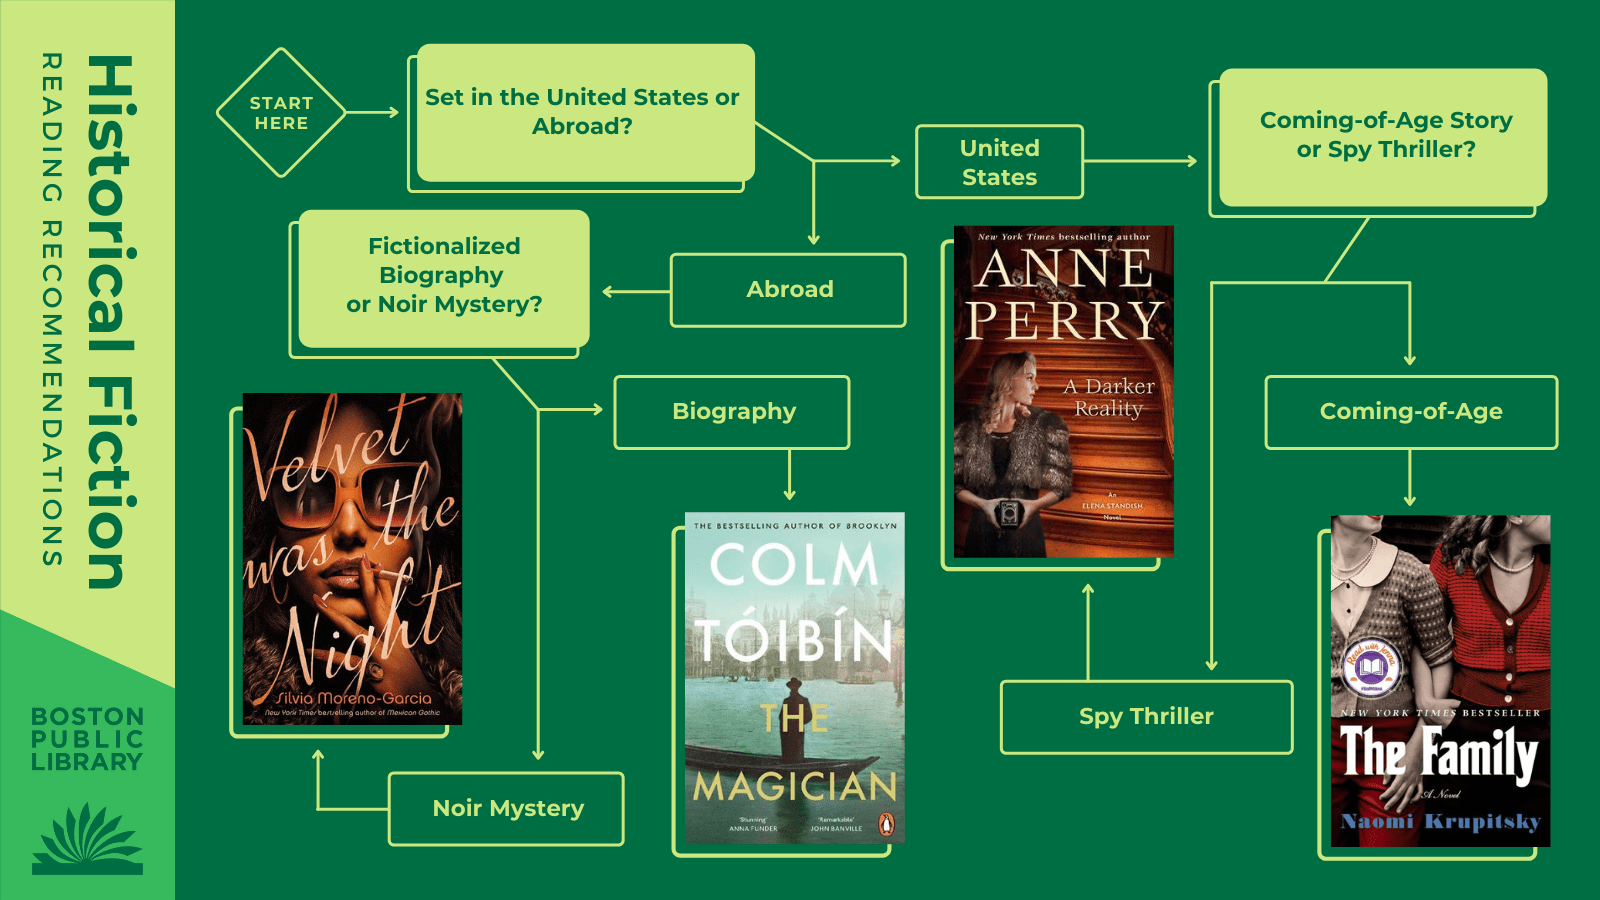 Q1: Set in the United States or Abroad? United States -> Q2: Coming-of-Age Story or Spy Thriller? Coming-of-Age: The Family by Naomi Krupitsky | Spy Thriller: A Darker Reality by Anne Perry | Spy Thriller -> Q3: Fictionalized Biography or Noir Mystery? Biography: The Magician by Colm Tóibín | Noir Mystery: Velvet Was the Night by Silvia Moreno-Garcia.